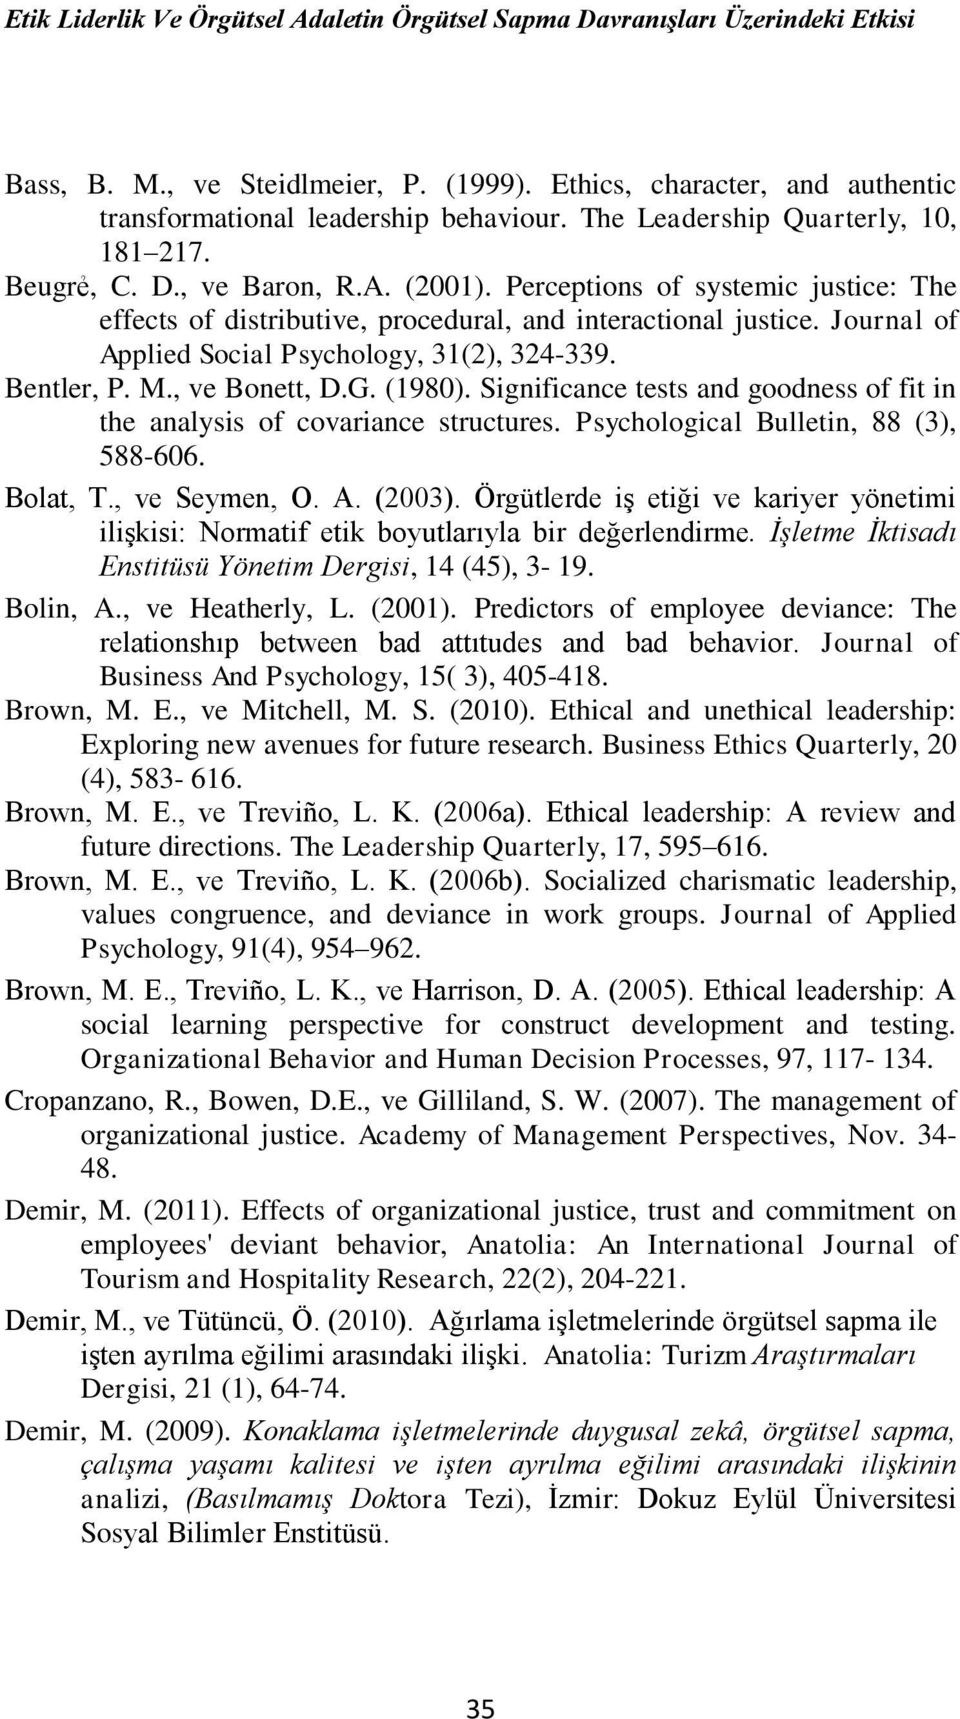 Journal of Applied Social Psychology, 31(2), 324-339. Bentler, P. M., ve Bonett, D.G. (1980). Significance tests and goodness of fit in the analysis of covariance structures.